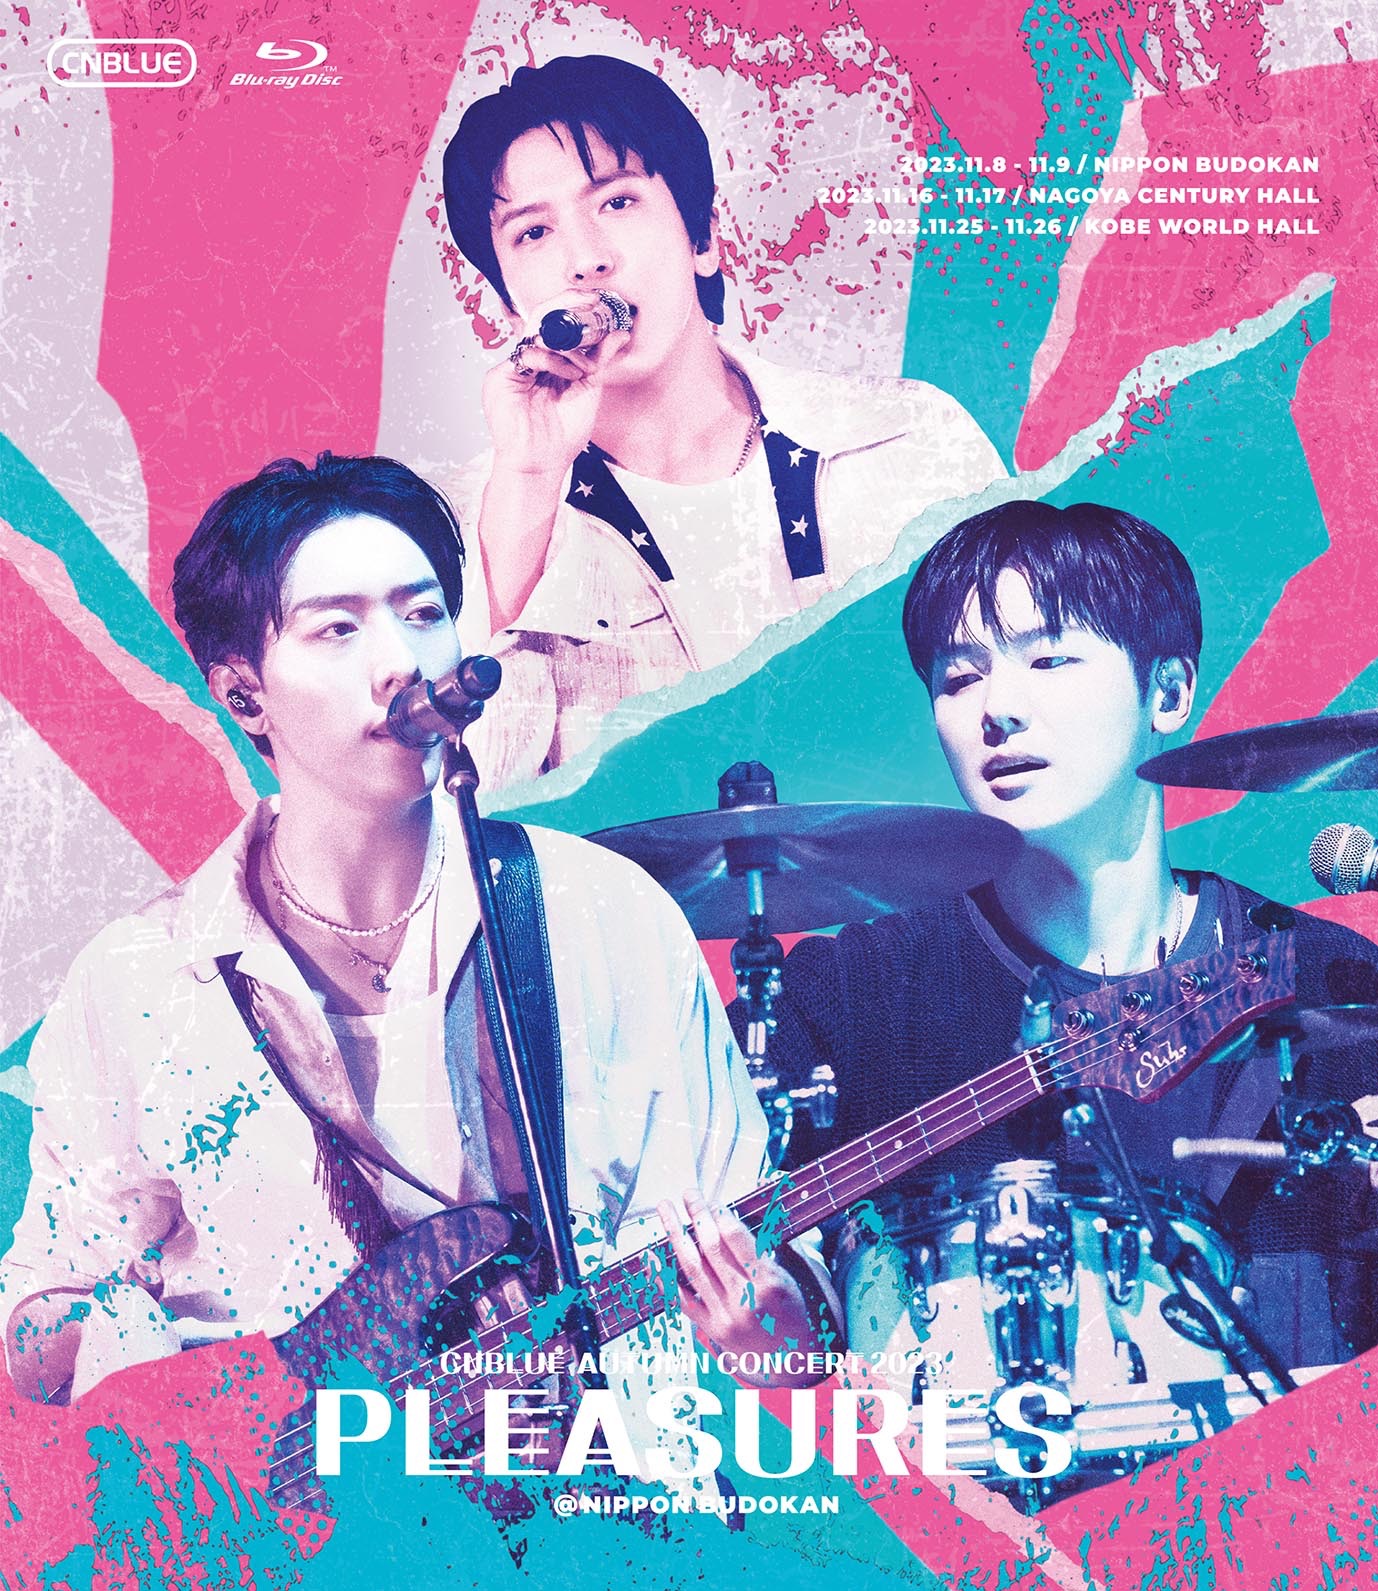 CNBLUE、日本武道館公演の密着メイキングムービー「SPECIAL FEATURE」ダイジェスト映像公開 - 画像一覧（4/7）